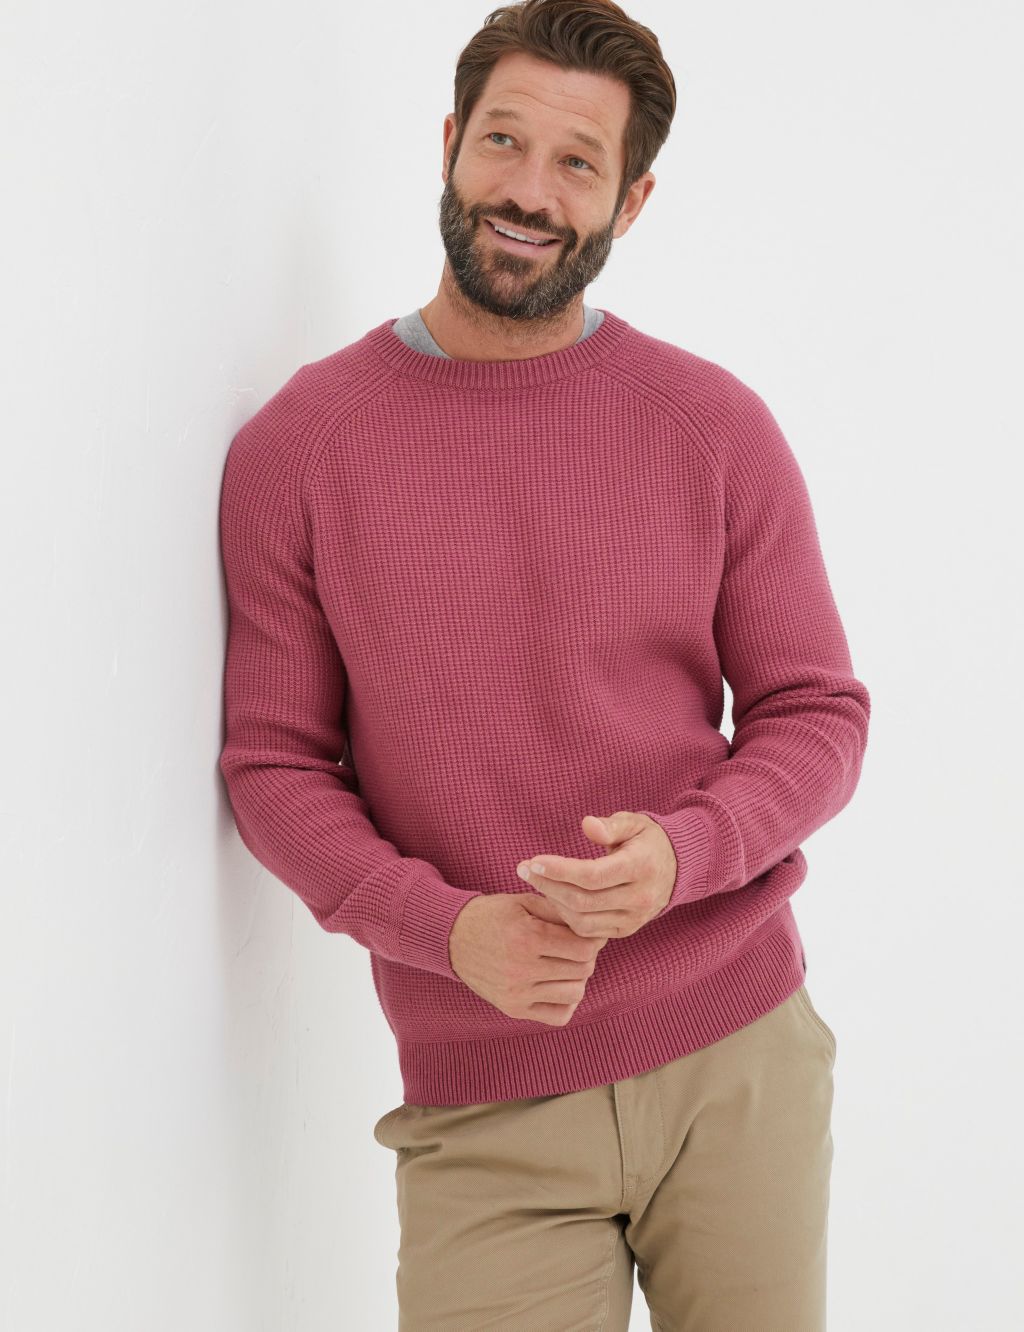 NWT M&S MENS PINK PURE COTTON V NECK SWEATER JUMPER LARGE 43 CHEST 